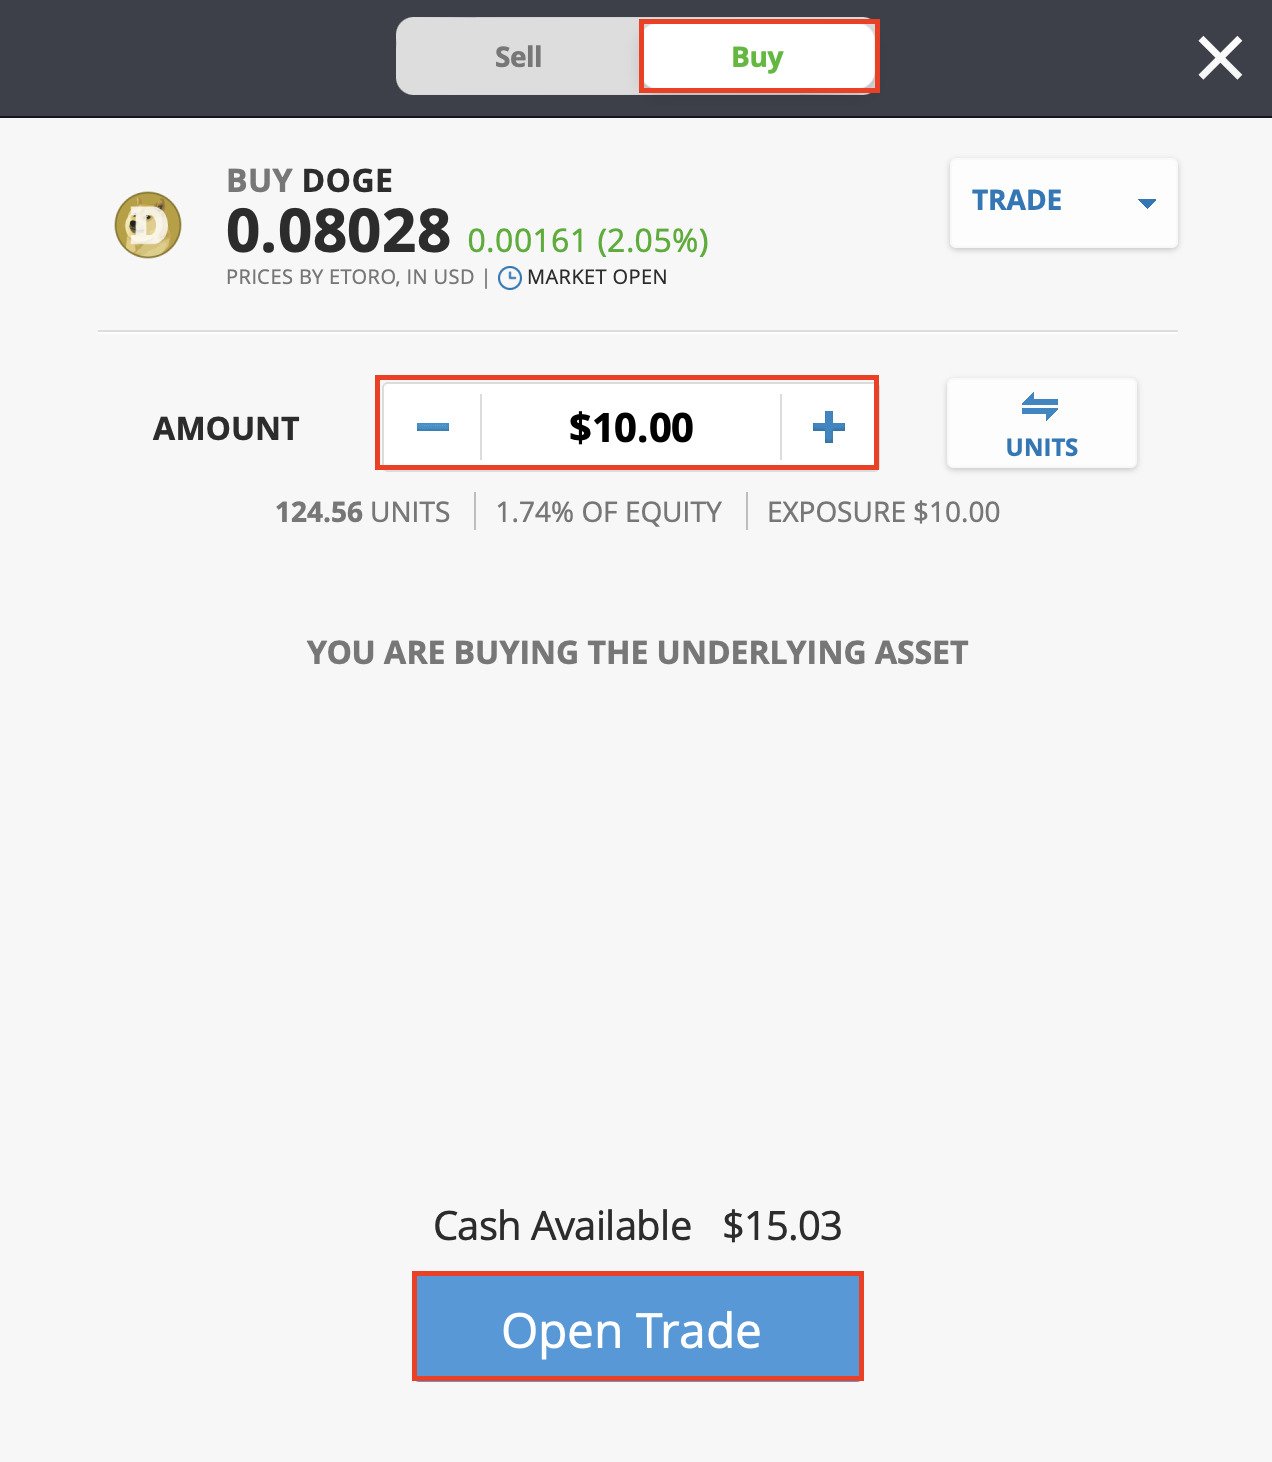 How to buy Dogecoin on eToro and complete the transaction easily